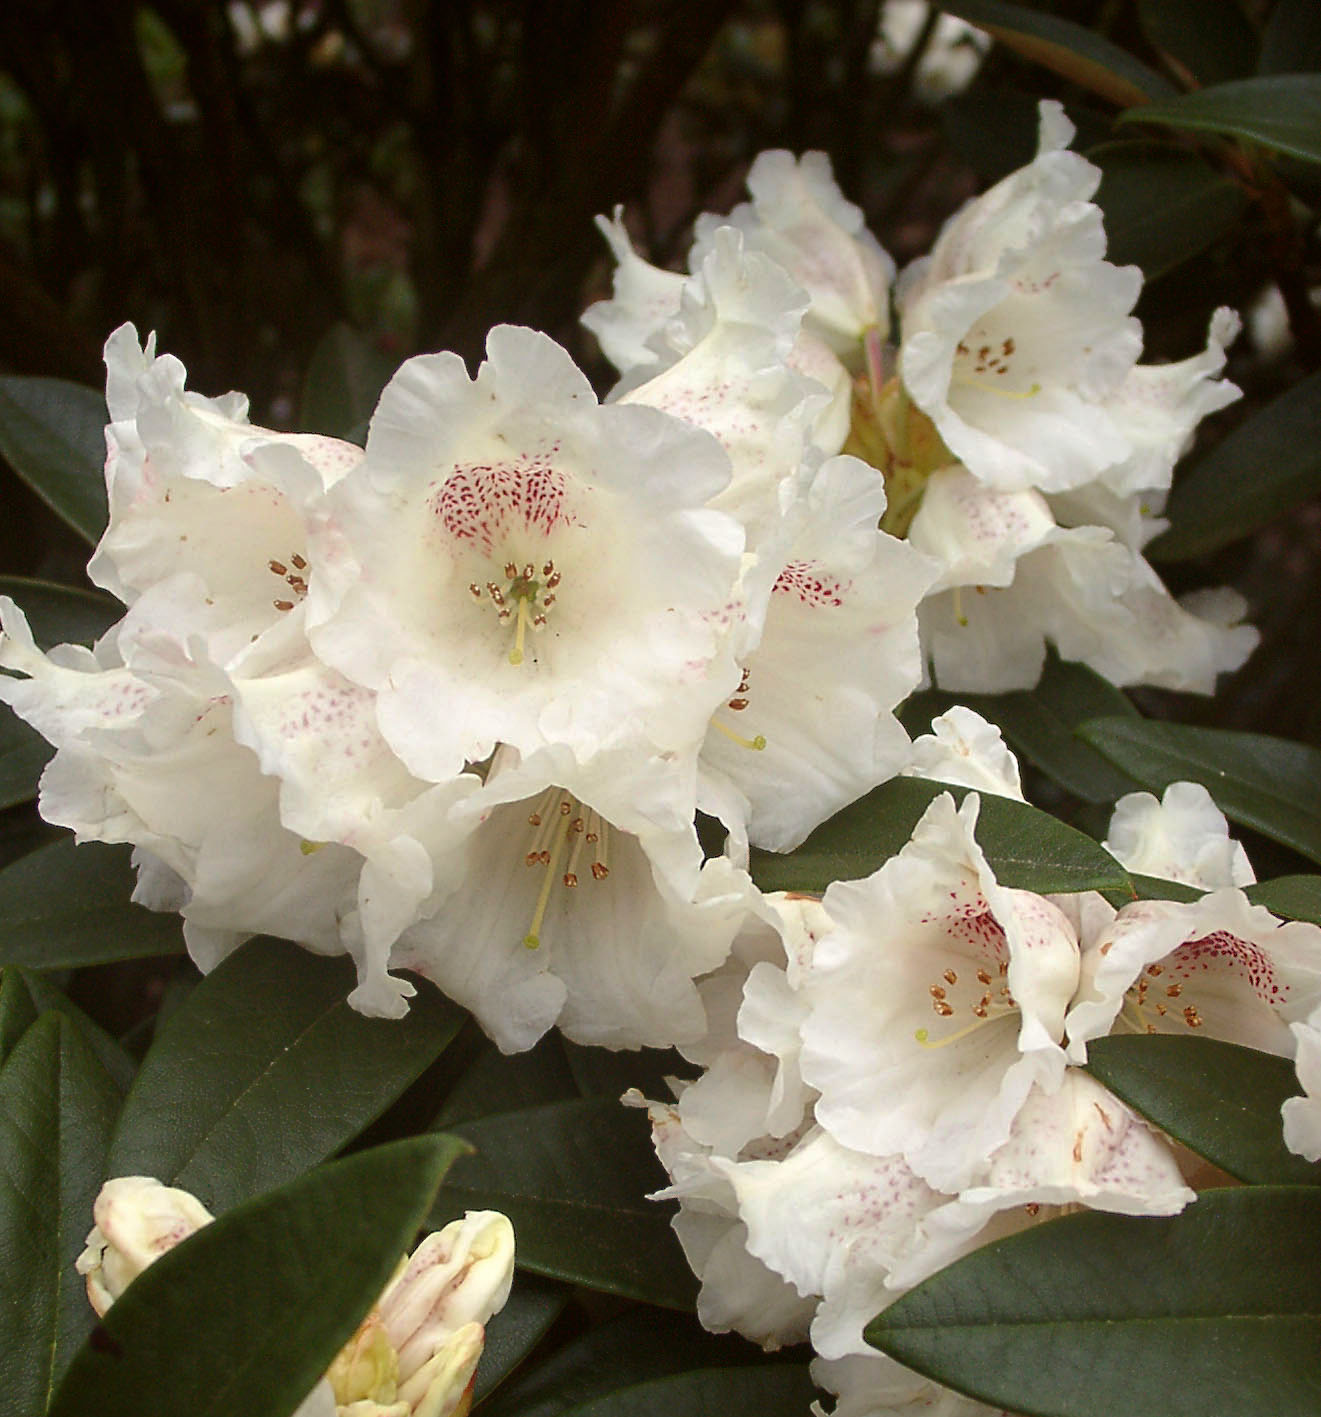 TALIENSE HONIGDUFT (HONEY FRAGRANCE) Rhododendron Larger Species Rhododendrons